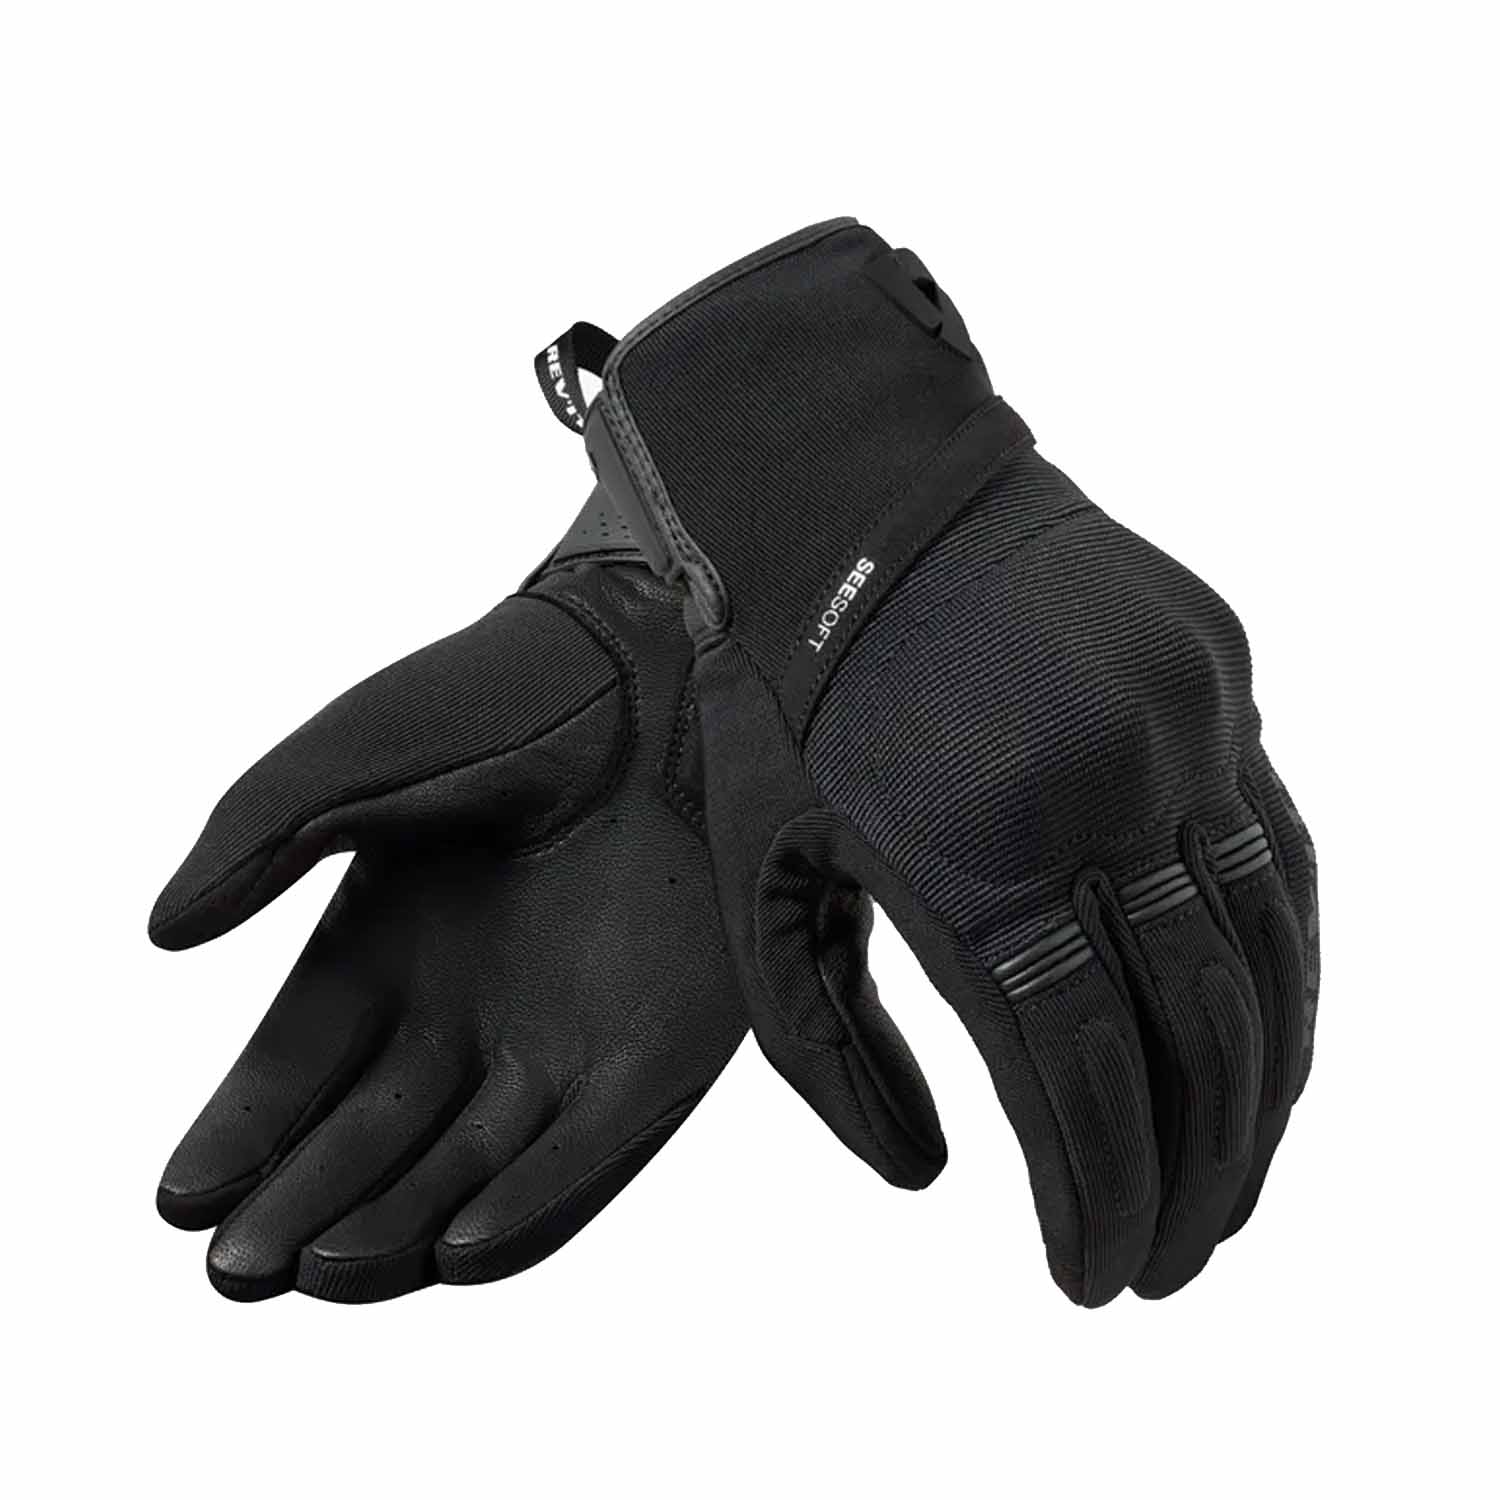 Image of EU REV'IT! Mosca 2 Gloves Black Taille M